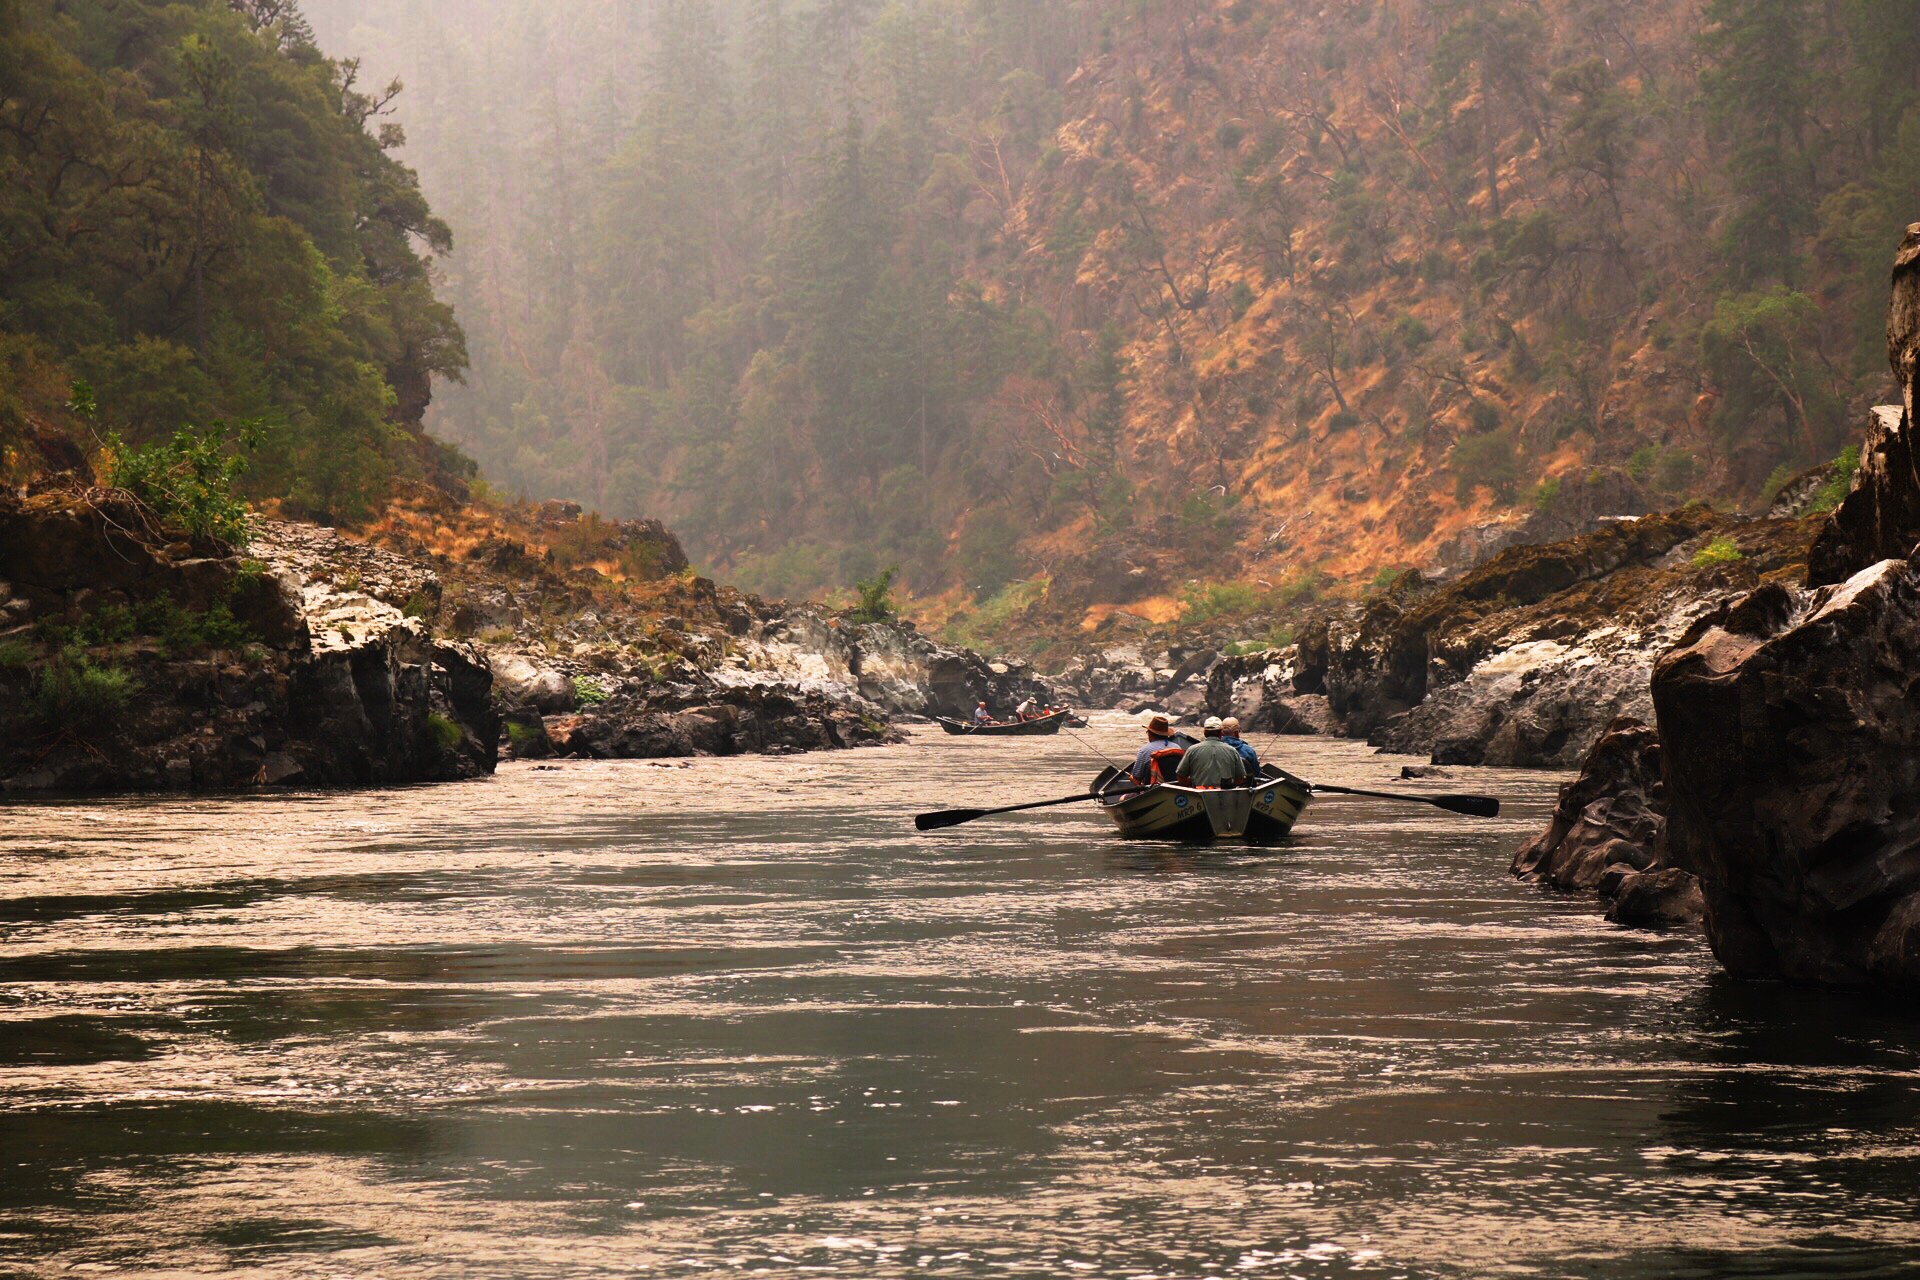 Floating and fishing in a drift boat through a smoke filled canyon on Oregon's wild and scenic Rogue River. The beginning of the Wild Human story.